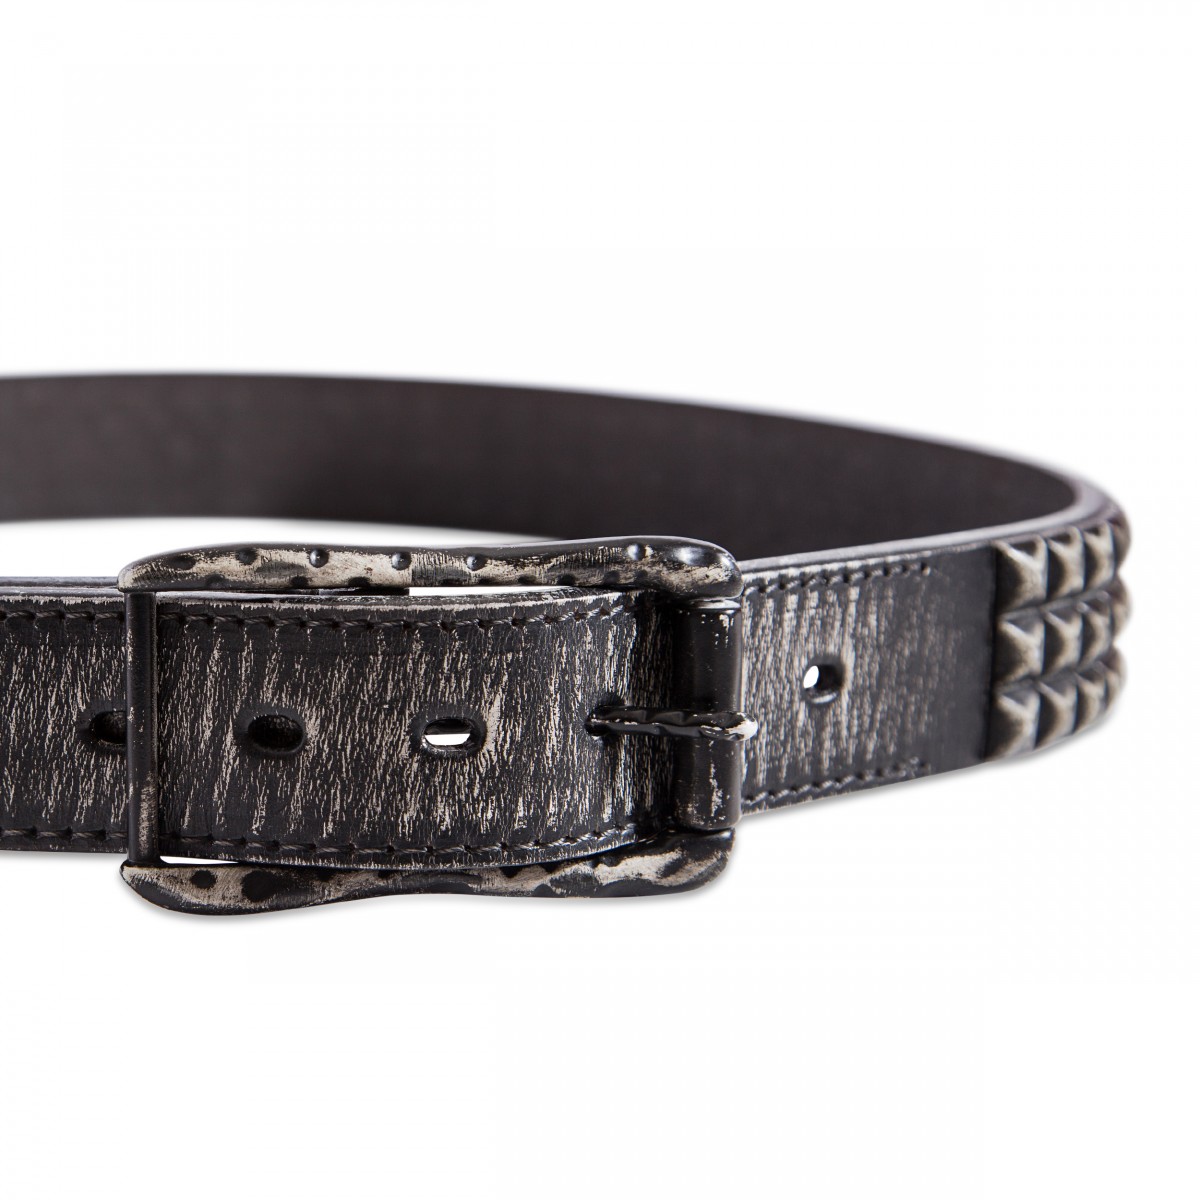 Triple Row Pyramid Stud Distressed Leather Belt 1.5in Width Sizes 30 ...